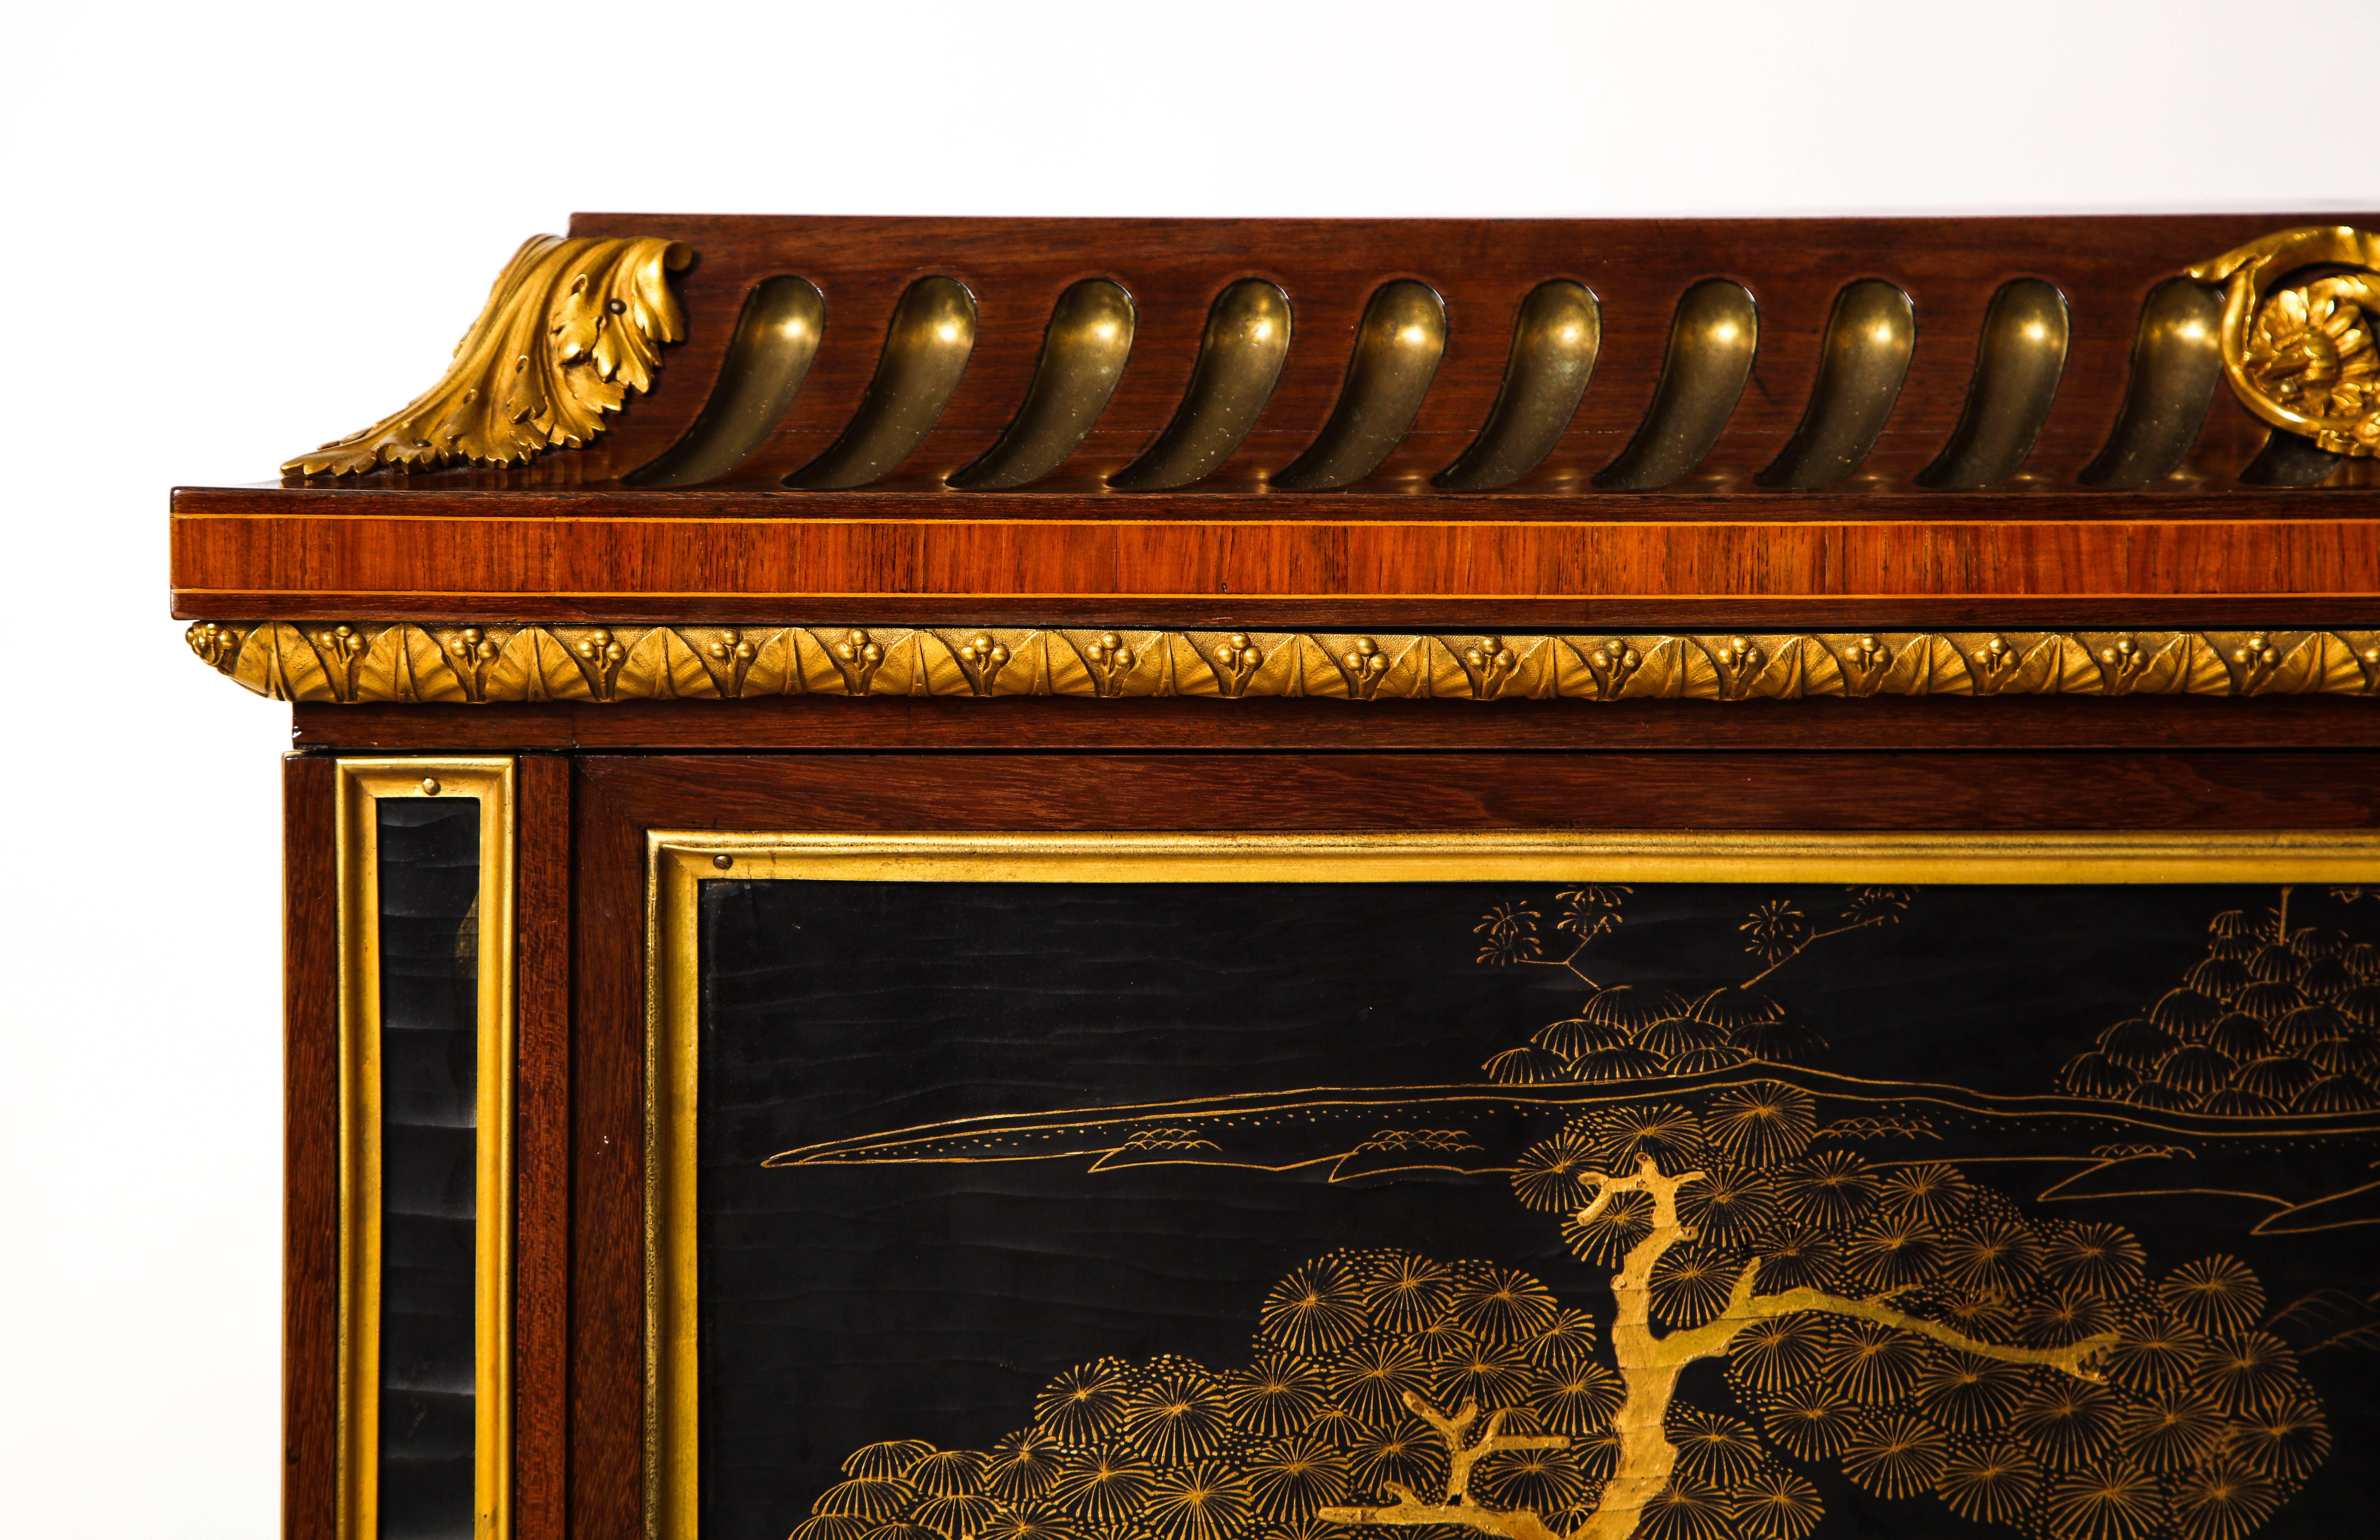 19th Century French Louis XVI Style Gilt Bronze-Mounted Mahogany Chinese Lacquered Cabinet For Sale